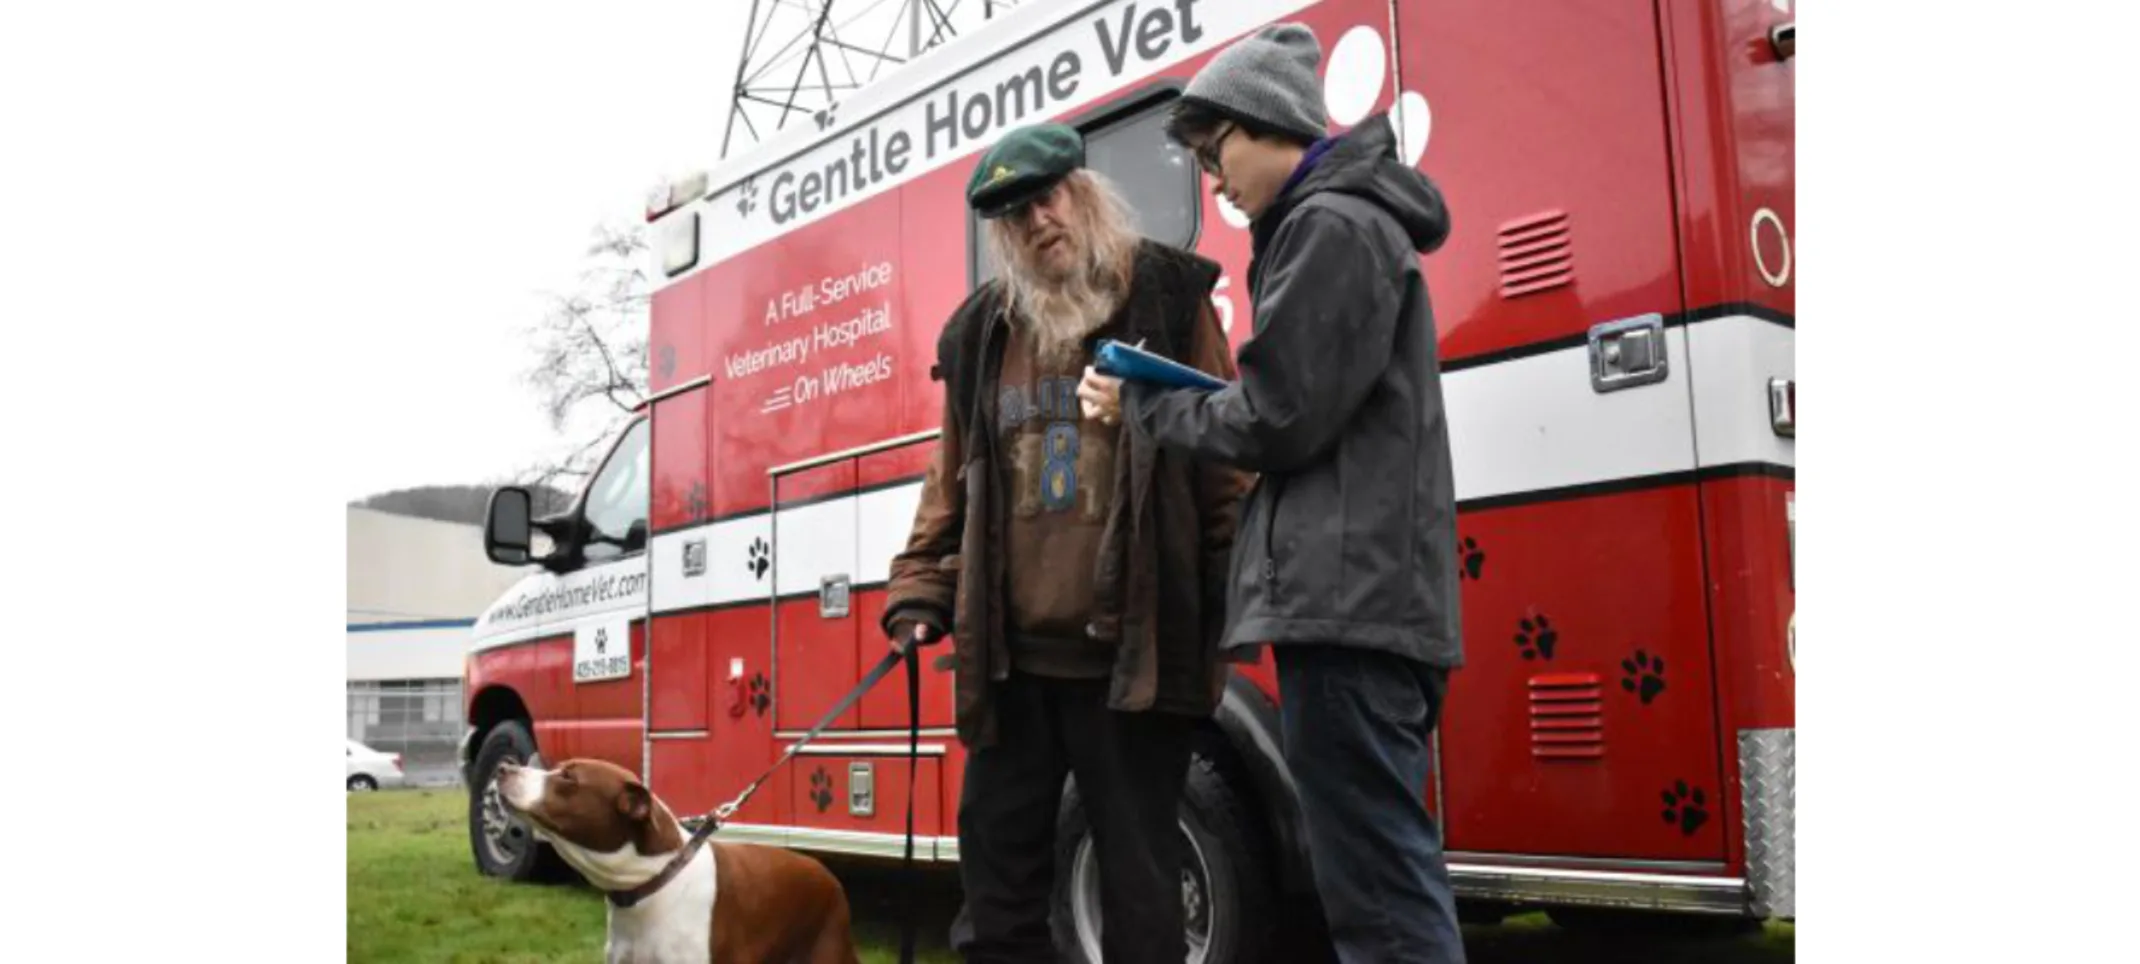 Red Gentle Home Vet truck and 2 men and a dog.